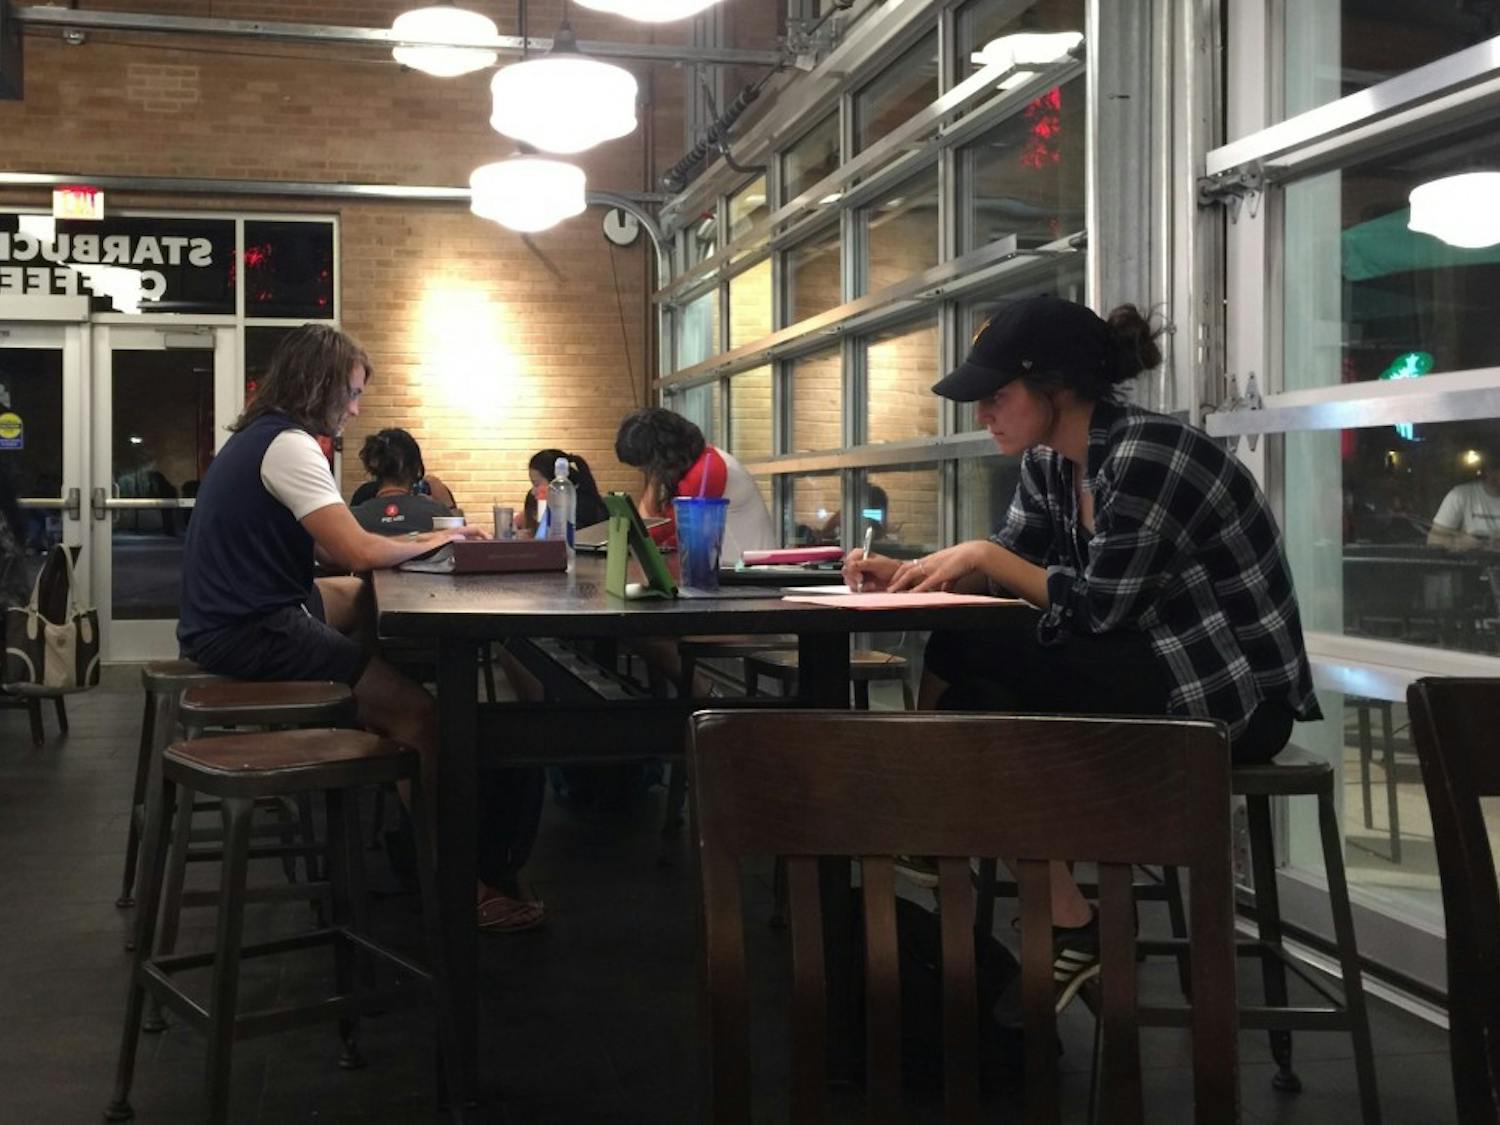 Students study at Starbucks at the Memorial Union on the ASU Tempe campus on Thursday, Sept. 29, 2016.